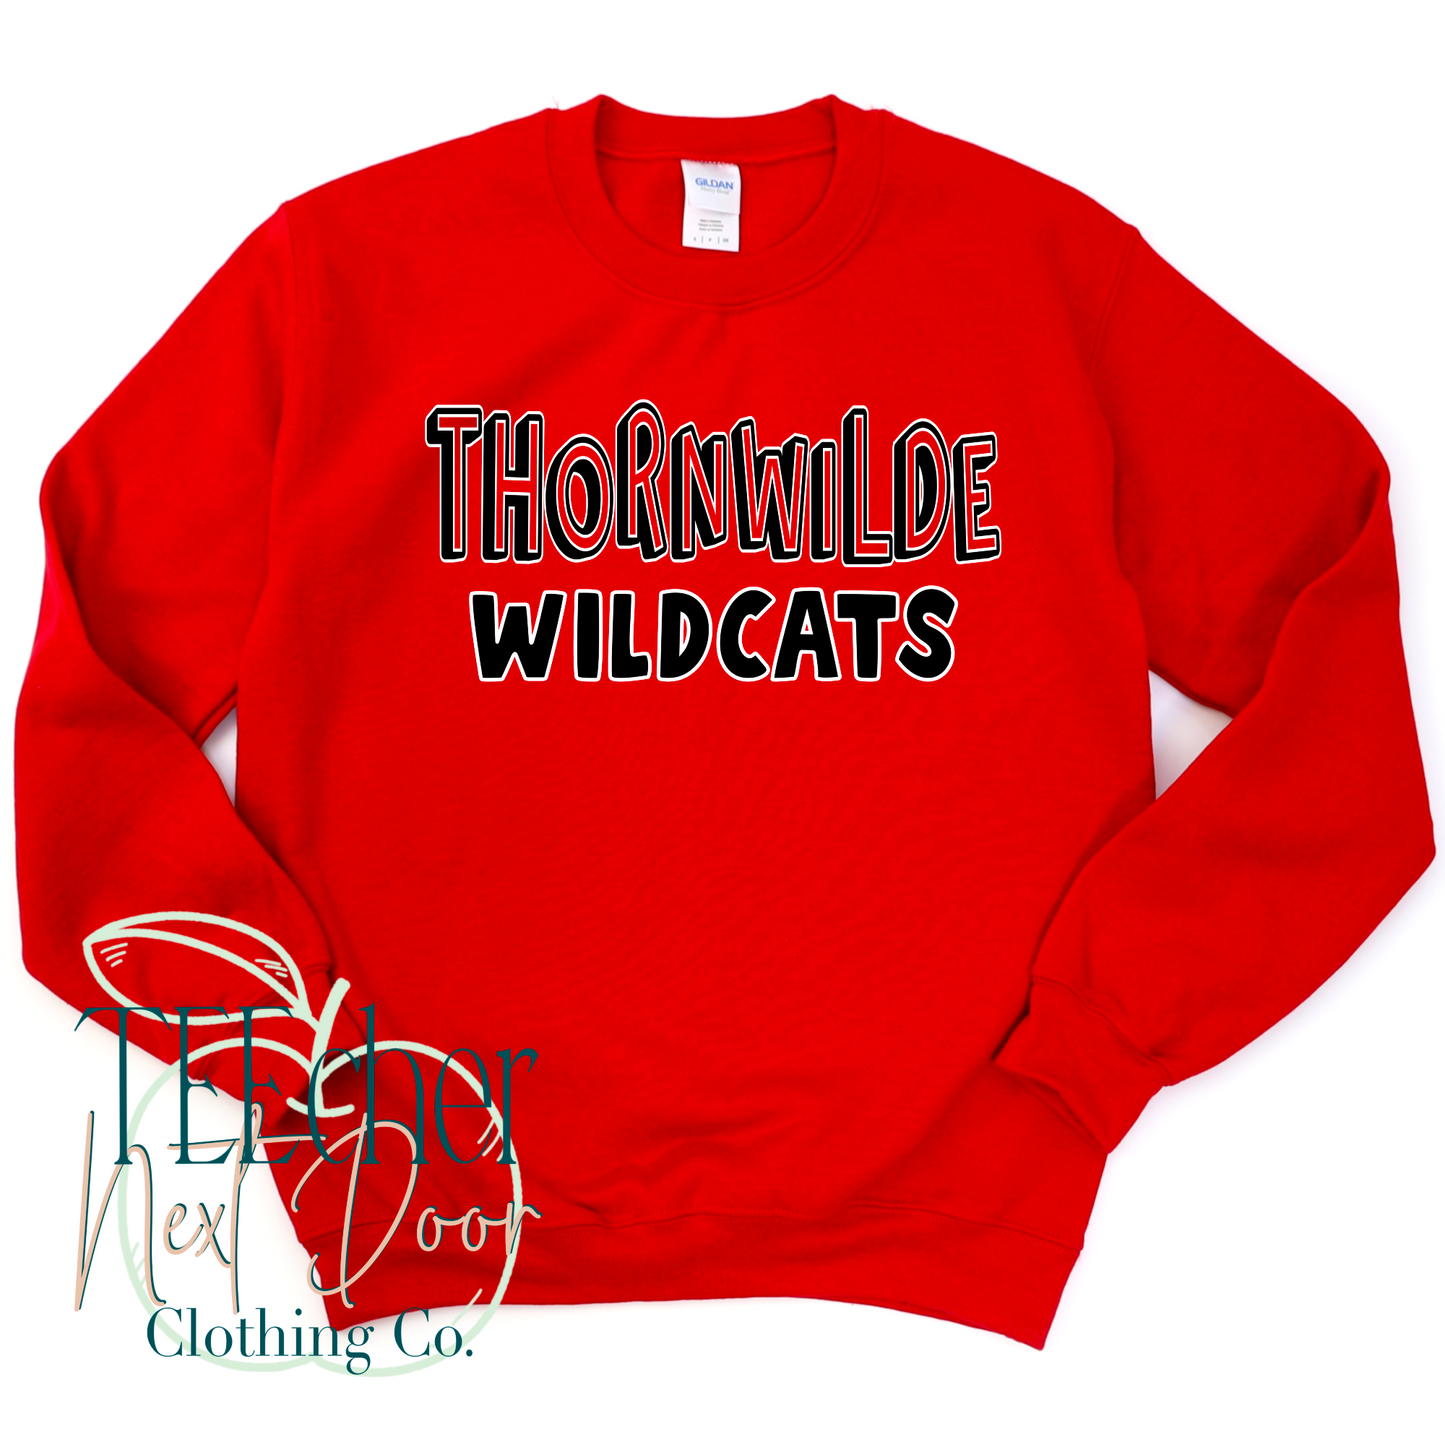 Thornwilde Wildcats Fun and Simple